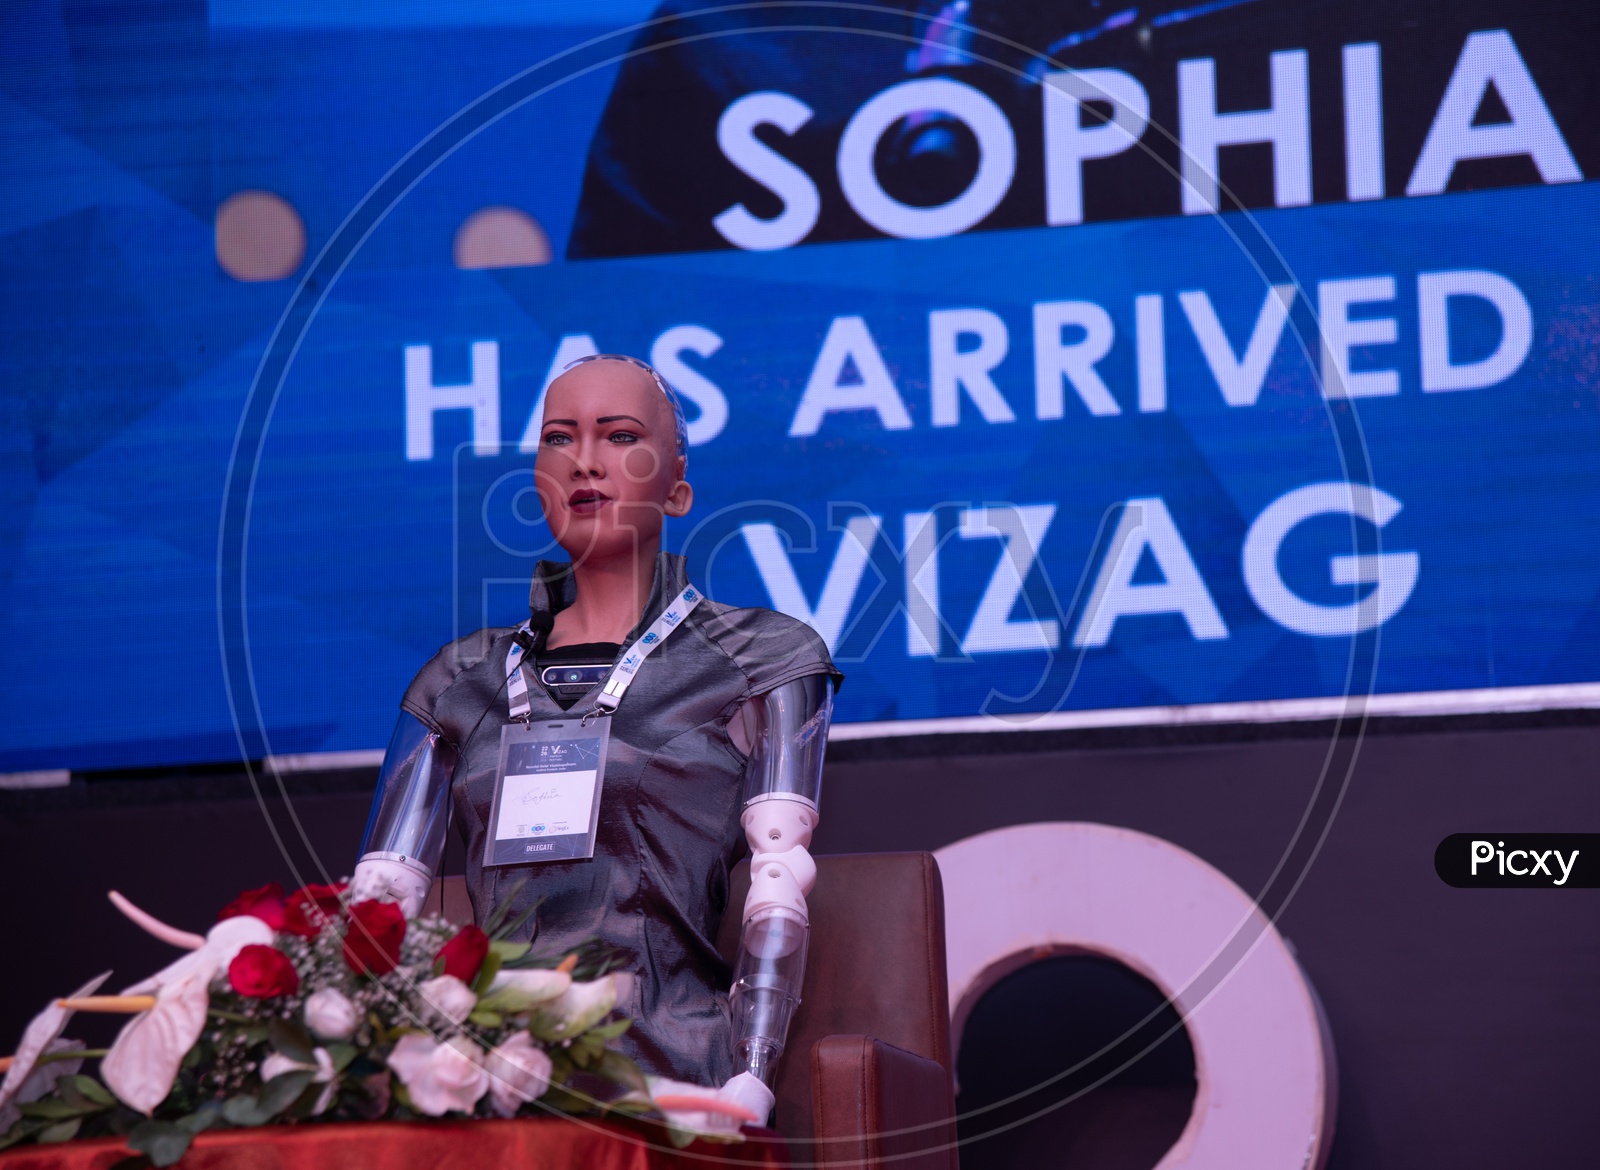 SOPHIA, First Humanoid Robot with UAE Citizenship at Vizag Fintech Valley festival, 2018